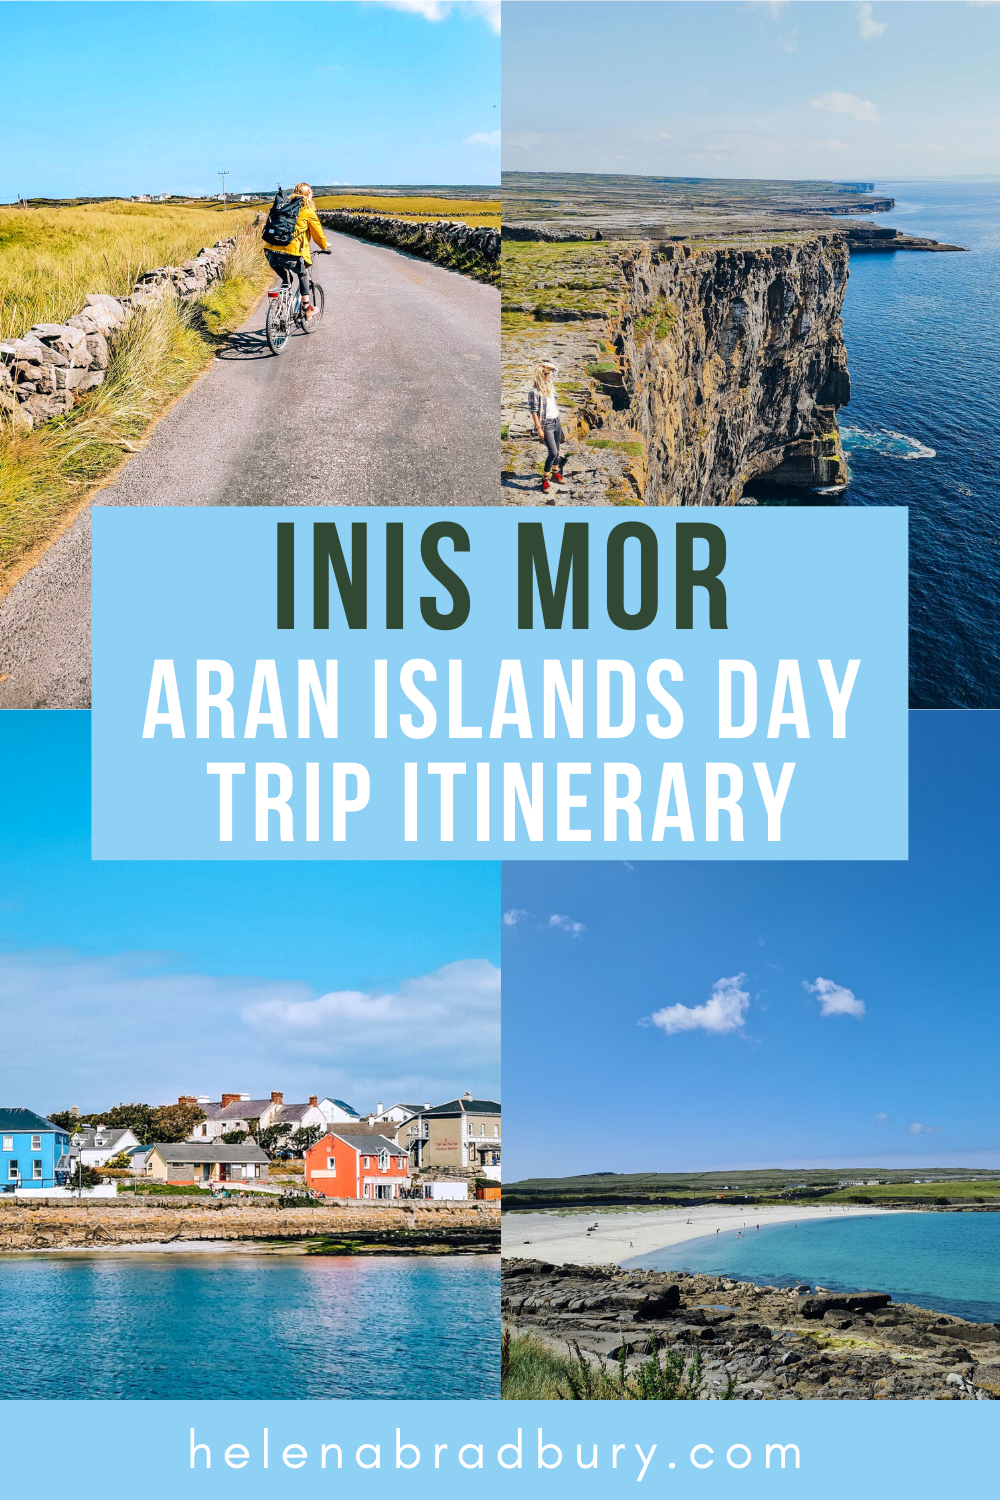 Discover things to do on Inis Mor with this day trip to Inis Mor itinerary. The largest island in the Aran Islands, Inis Mor is a hidden gem off the coast of Ireland | inis mor ireland guide | inishmore aran islands | inishmore ireland | the aran isl